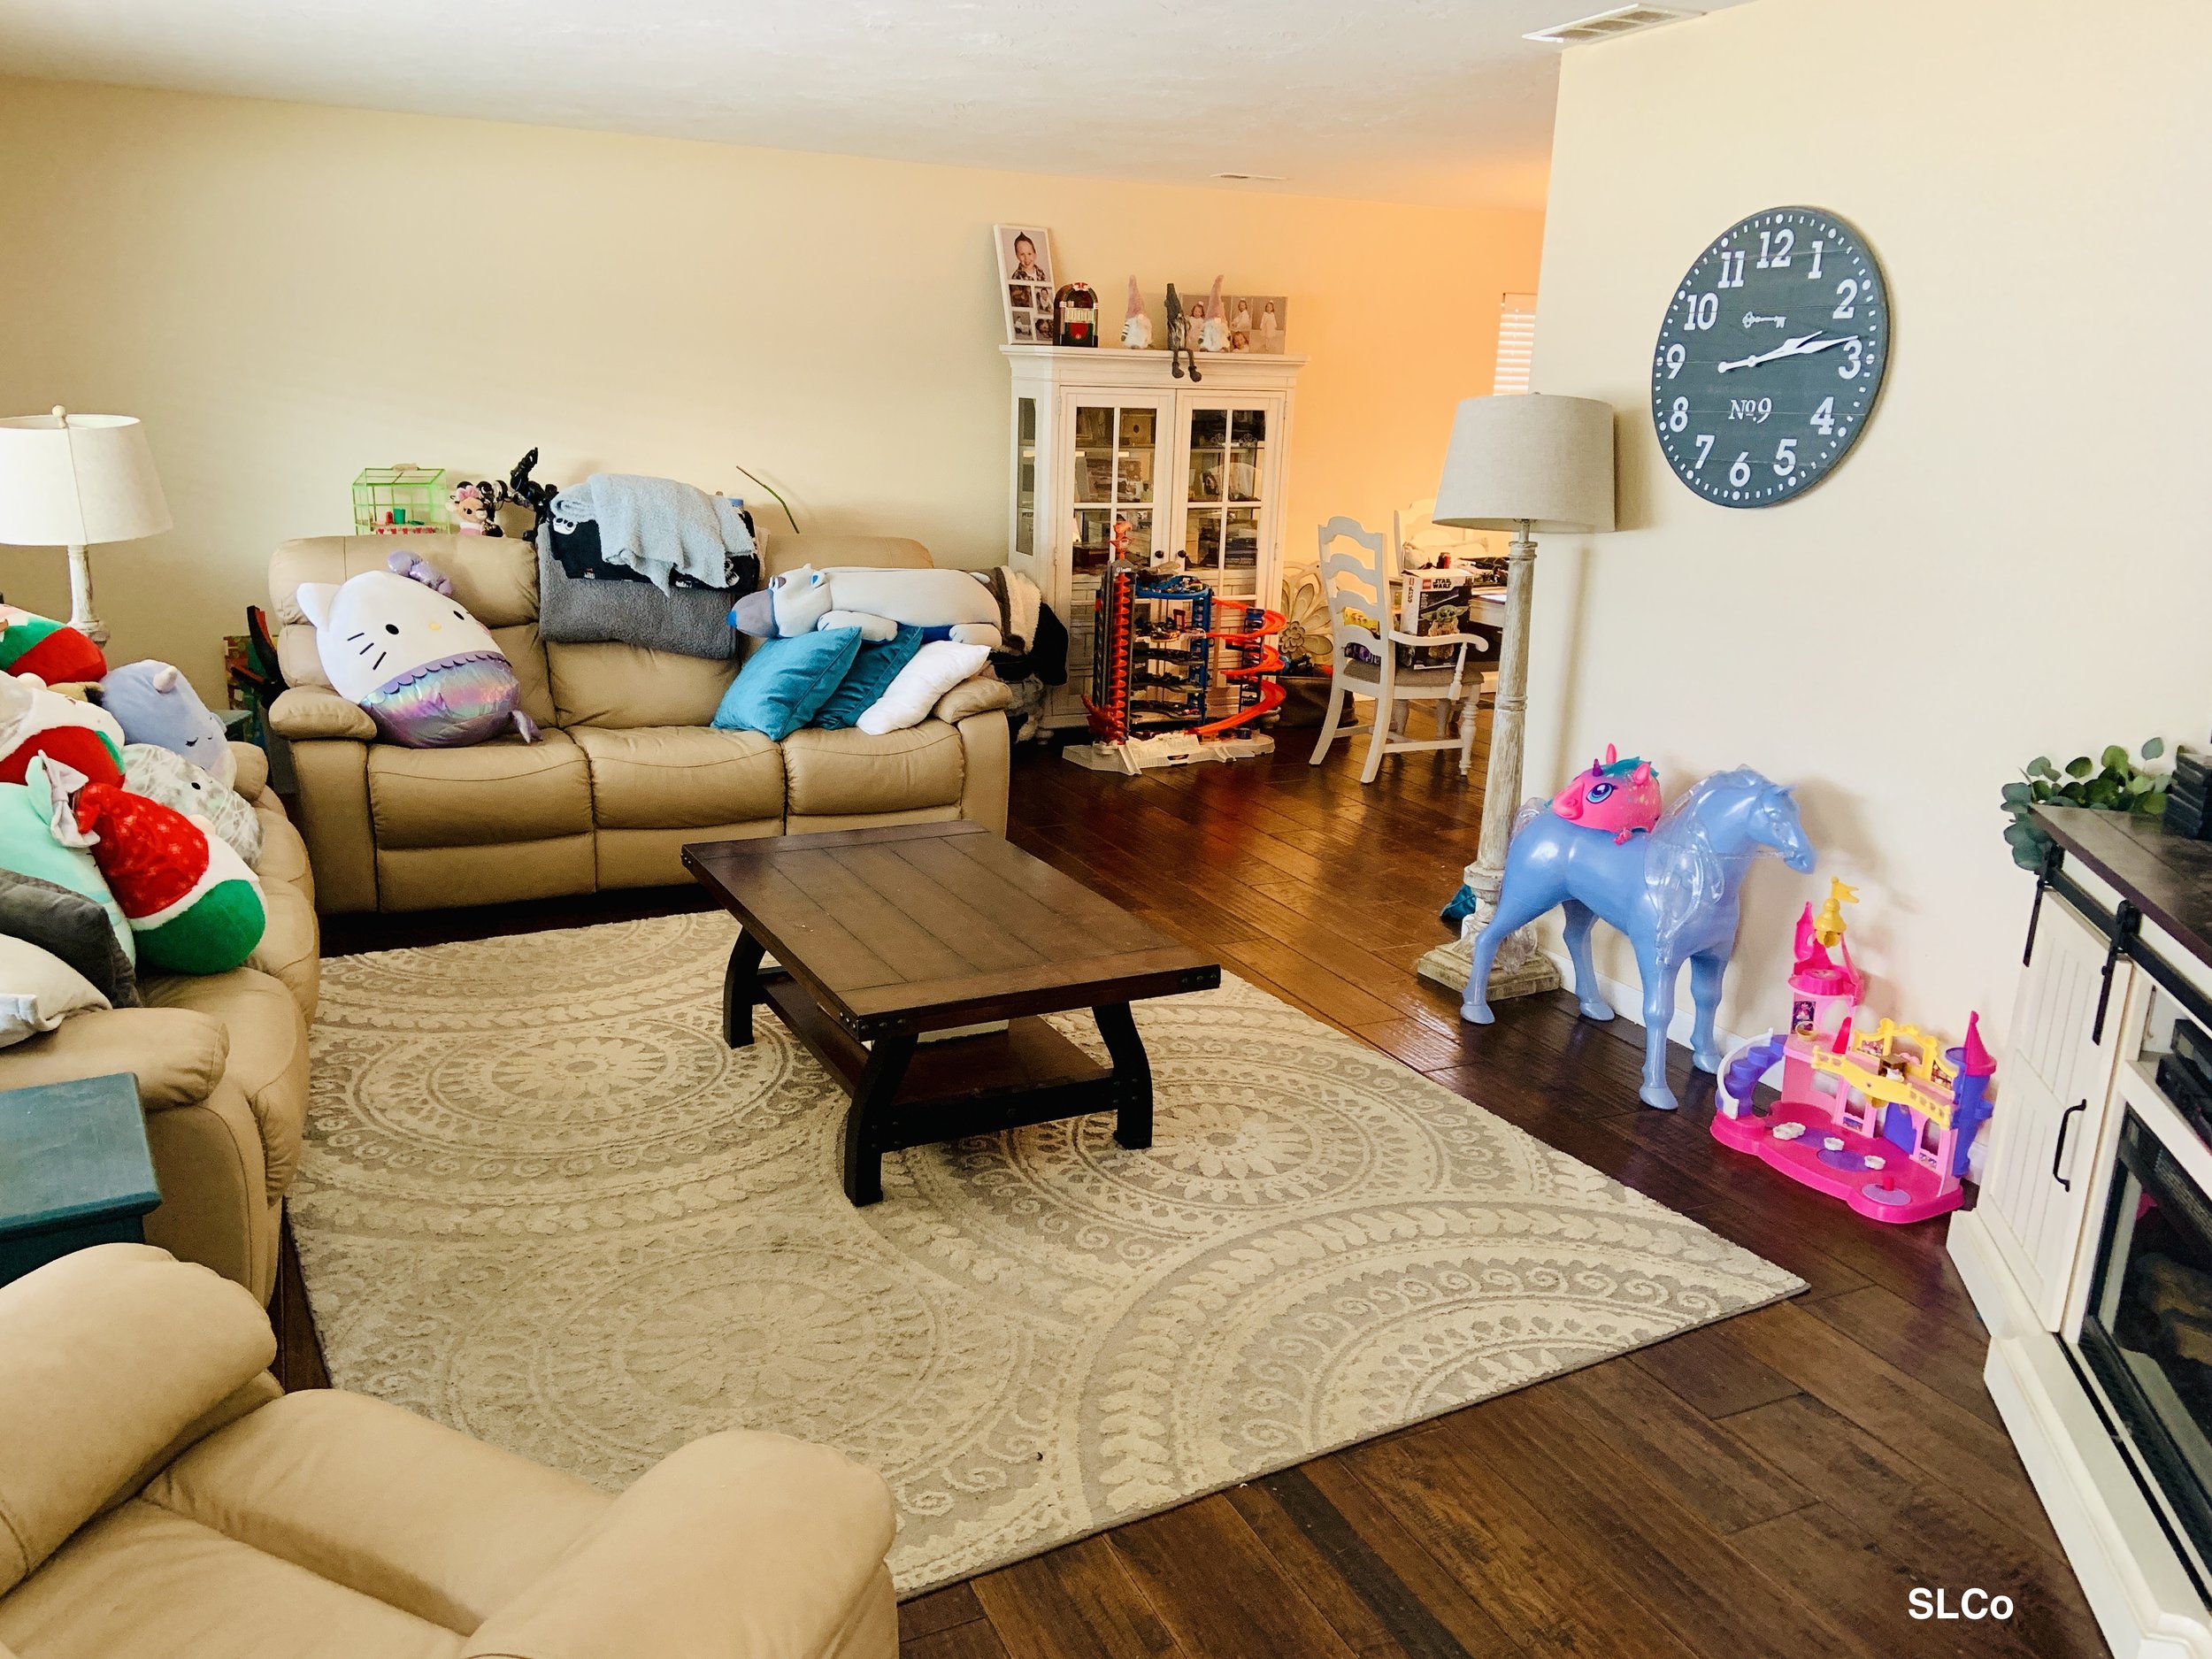 Smaller living room with two couches with pillows on them and toys to the side, floor clear.